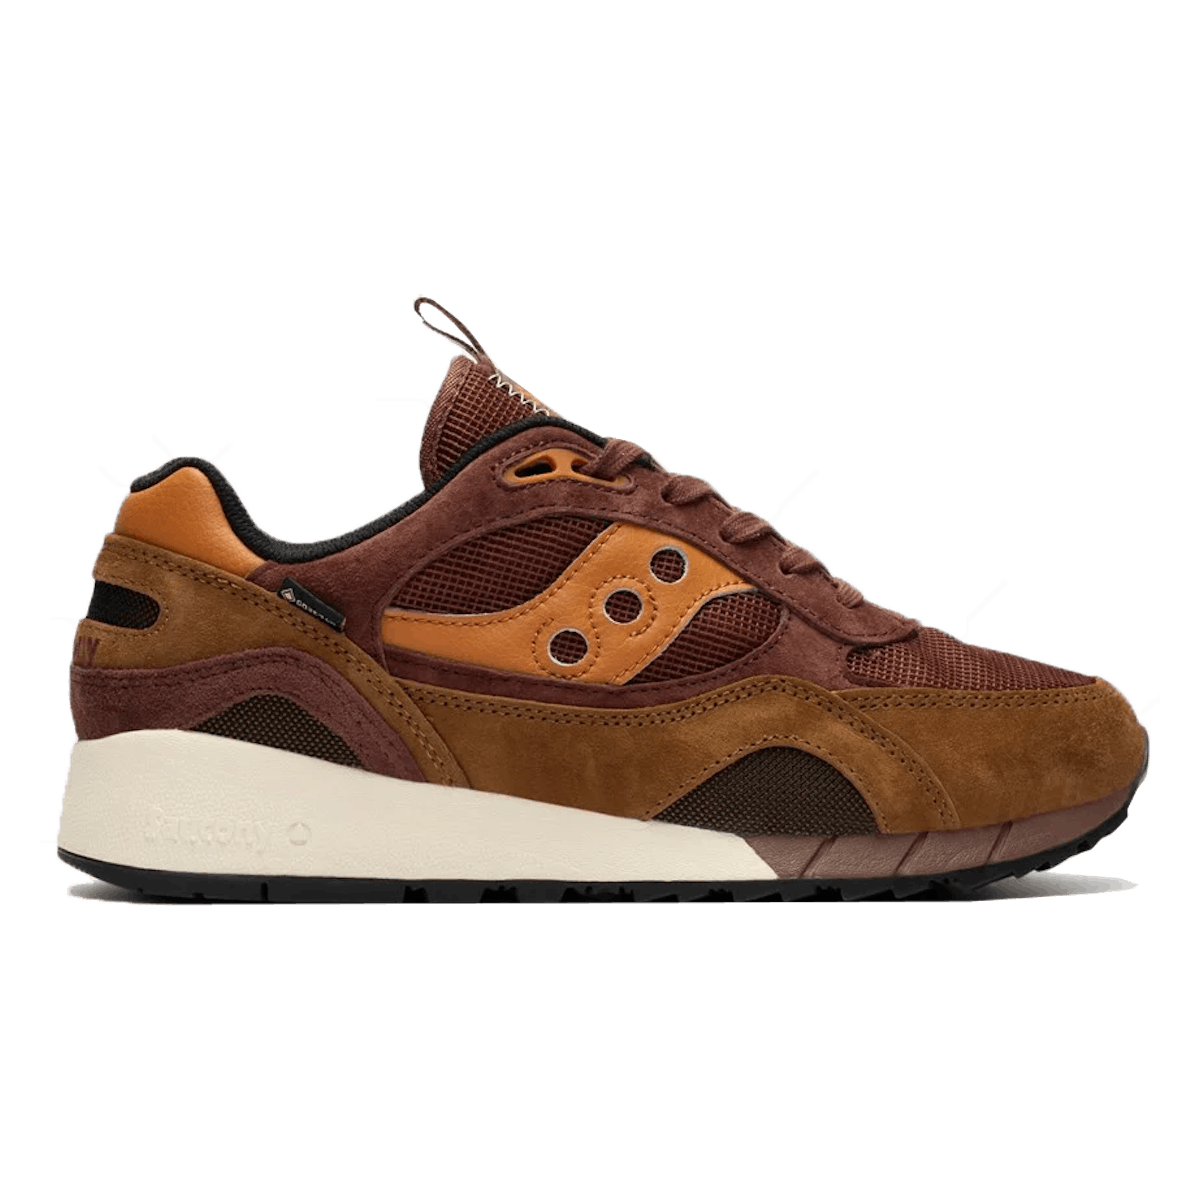 Saucony Shadow 6000 "Brown"